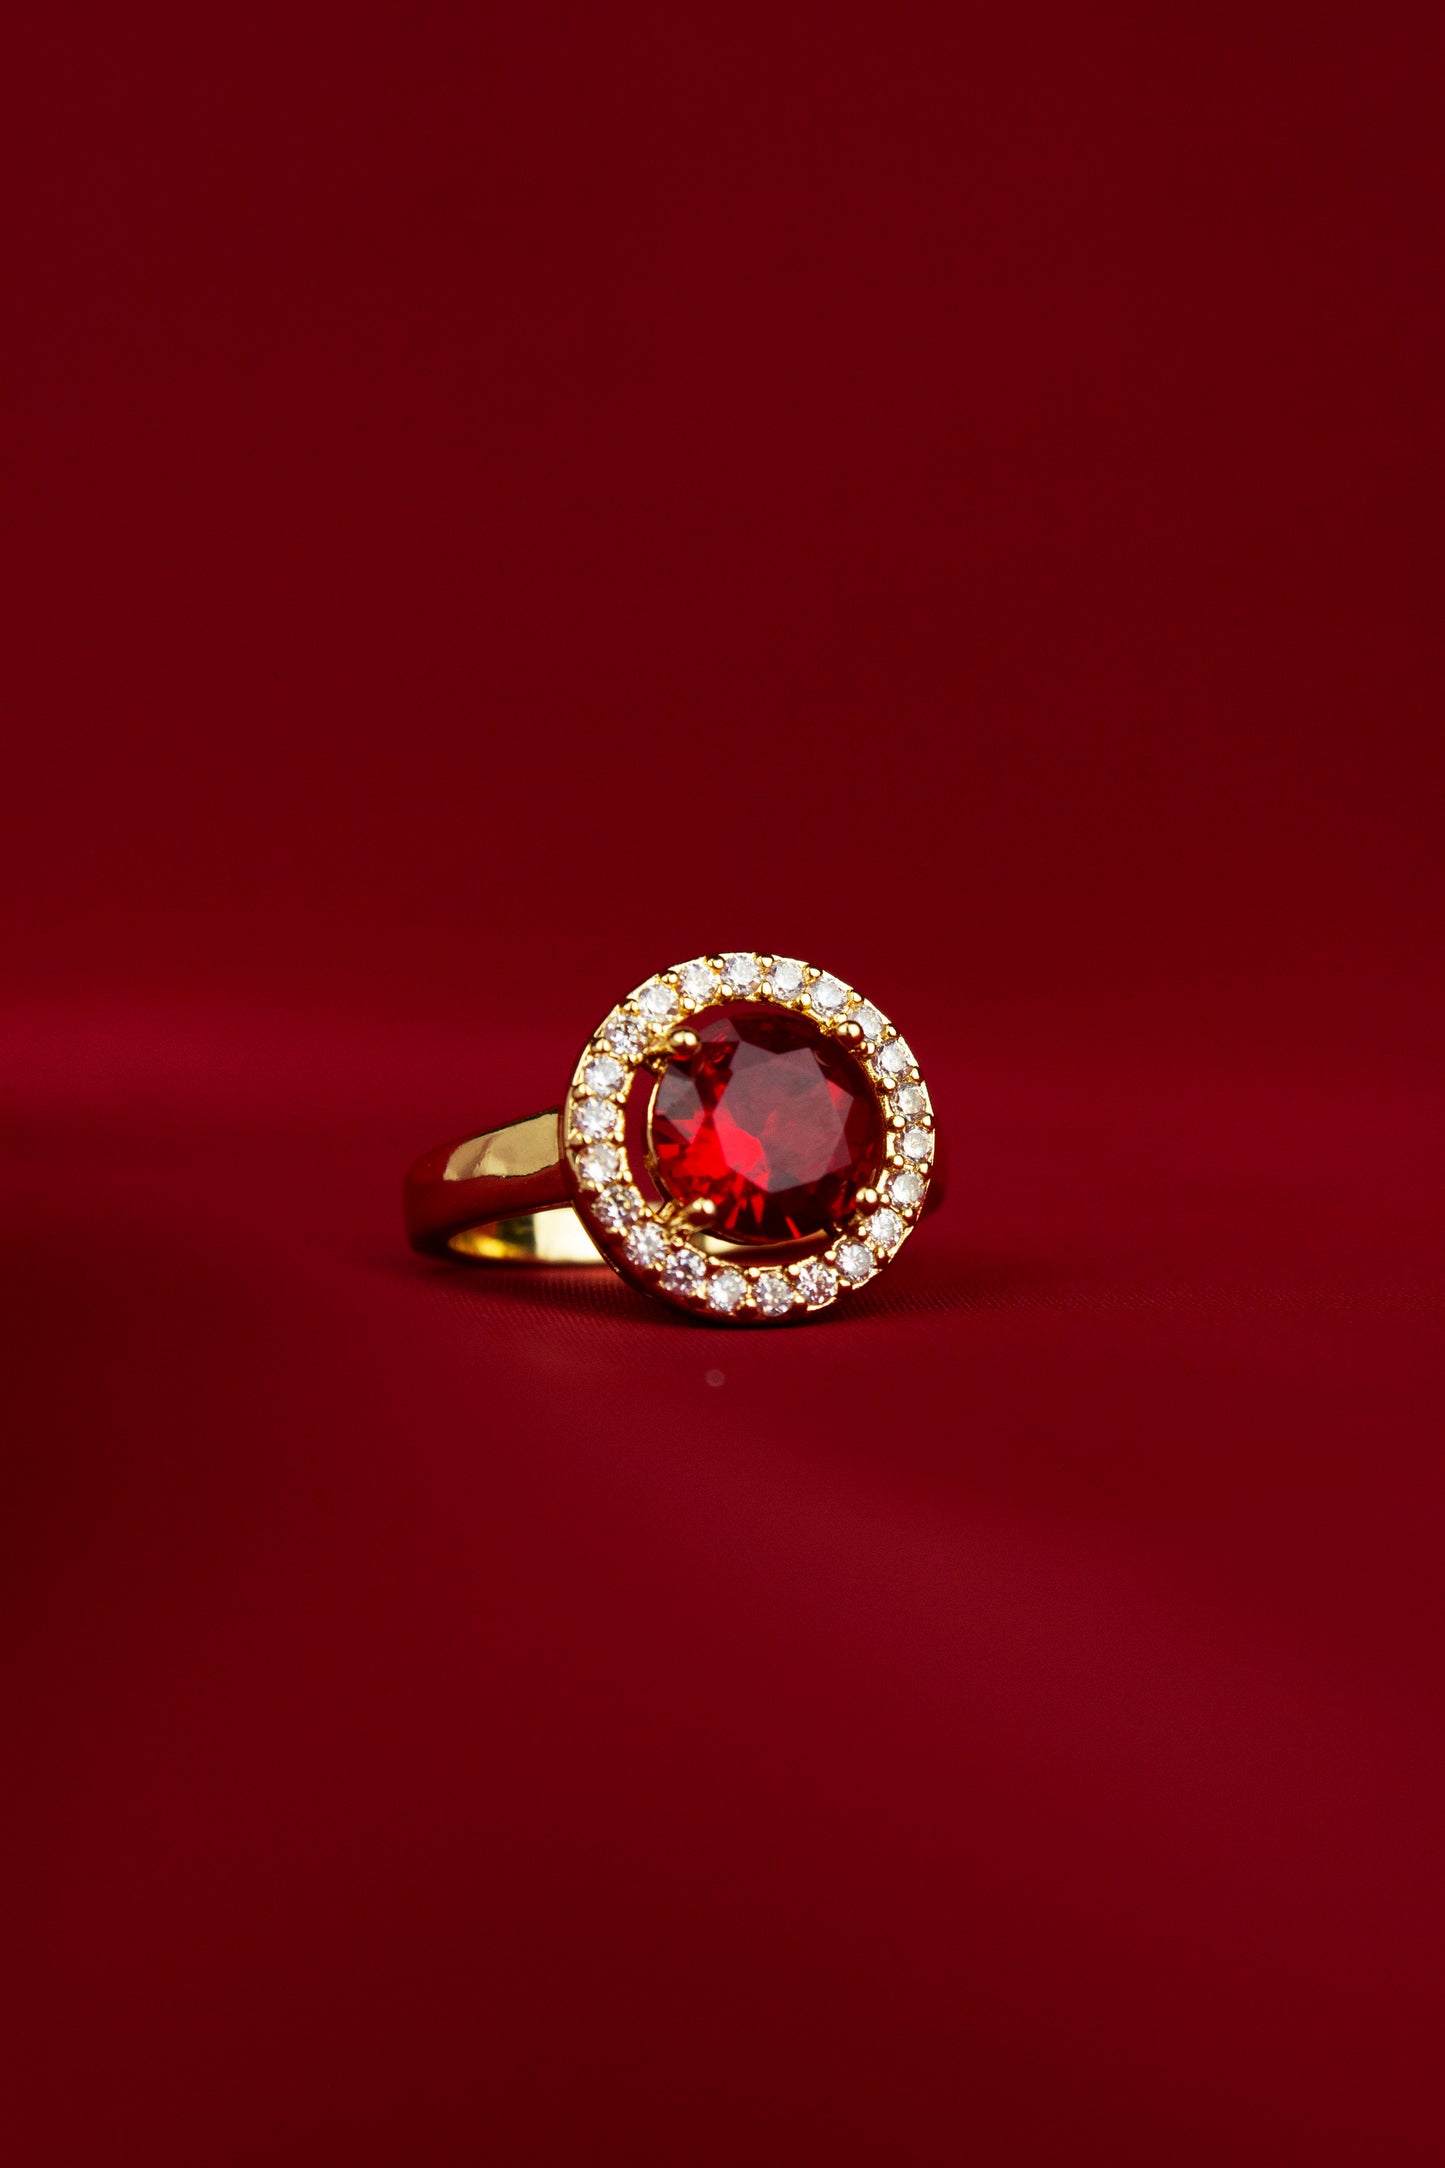 Special Round Ring - Red Diamond - One Carat Gold Plated